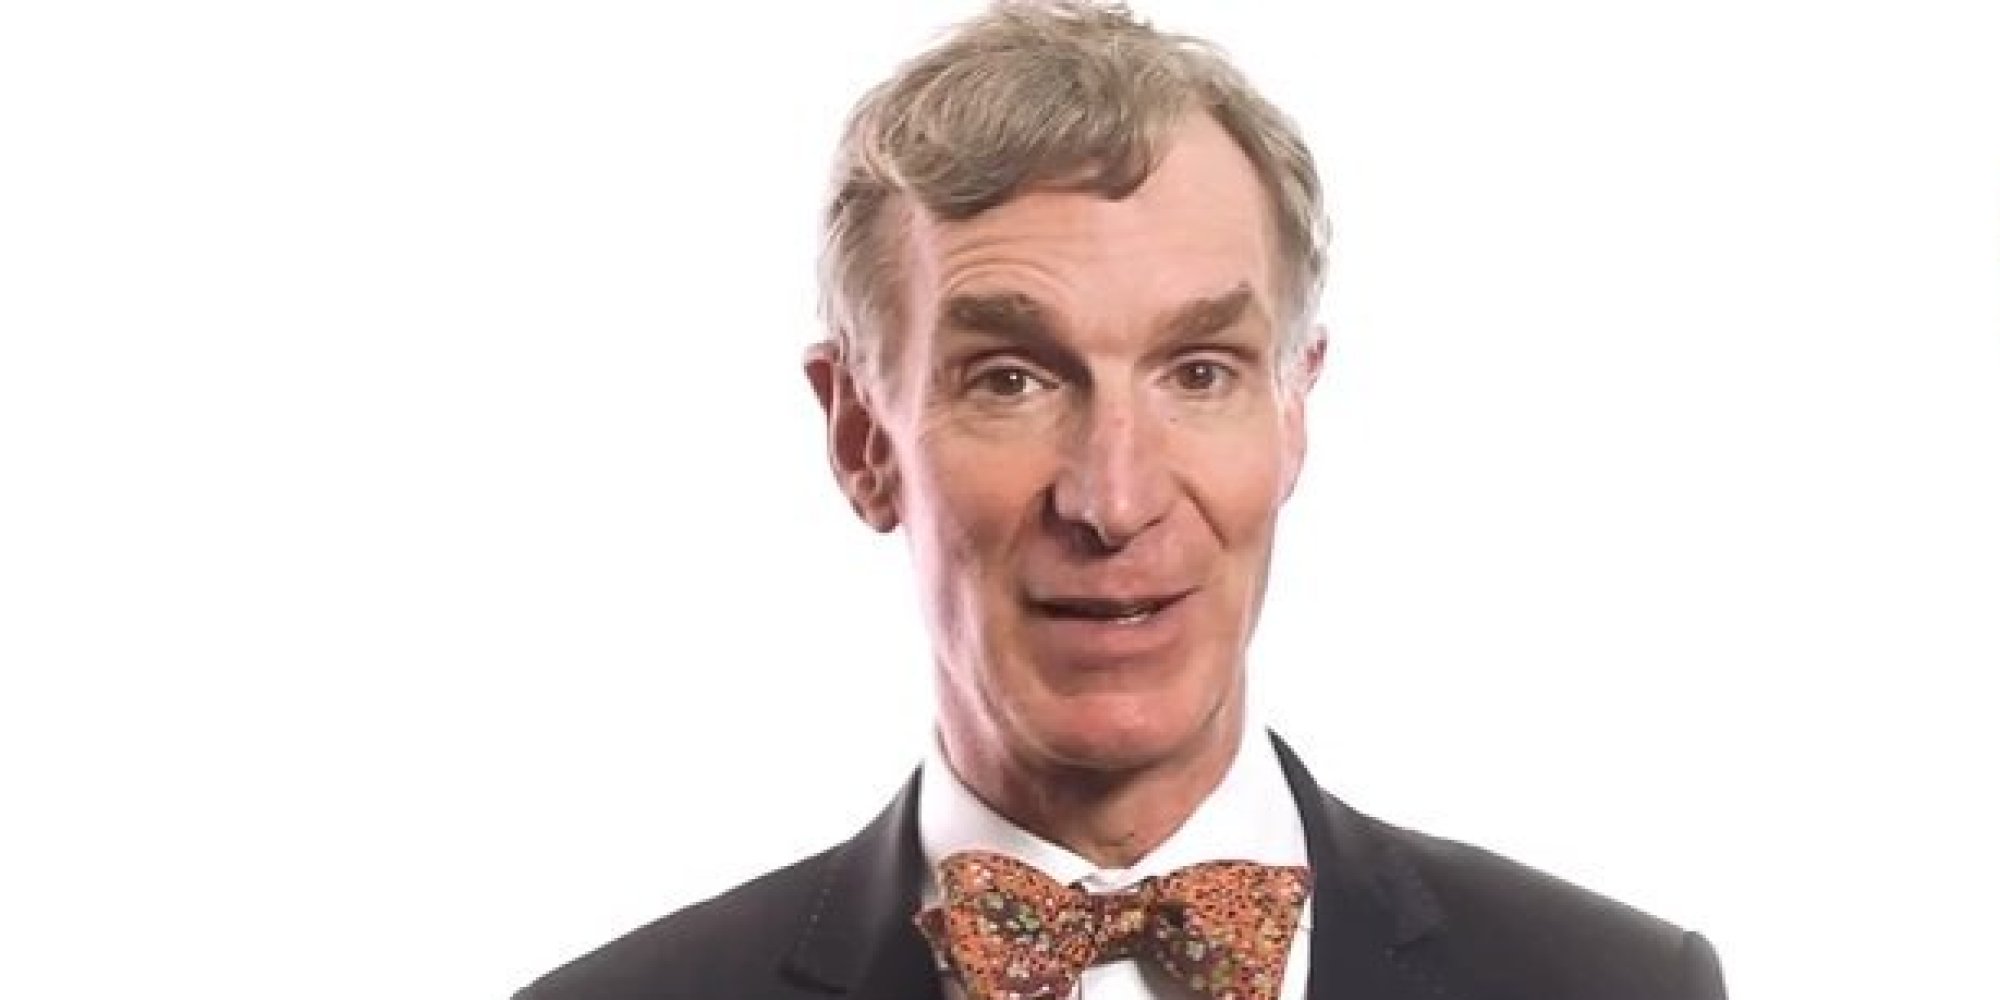 Bill Nye Says Donating The Cost Of One Cup Of Coffee Could Help Find